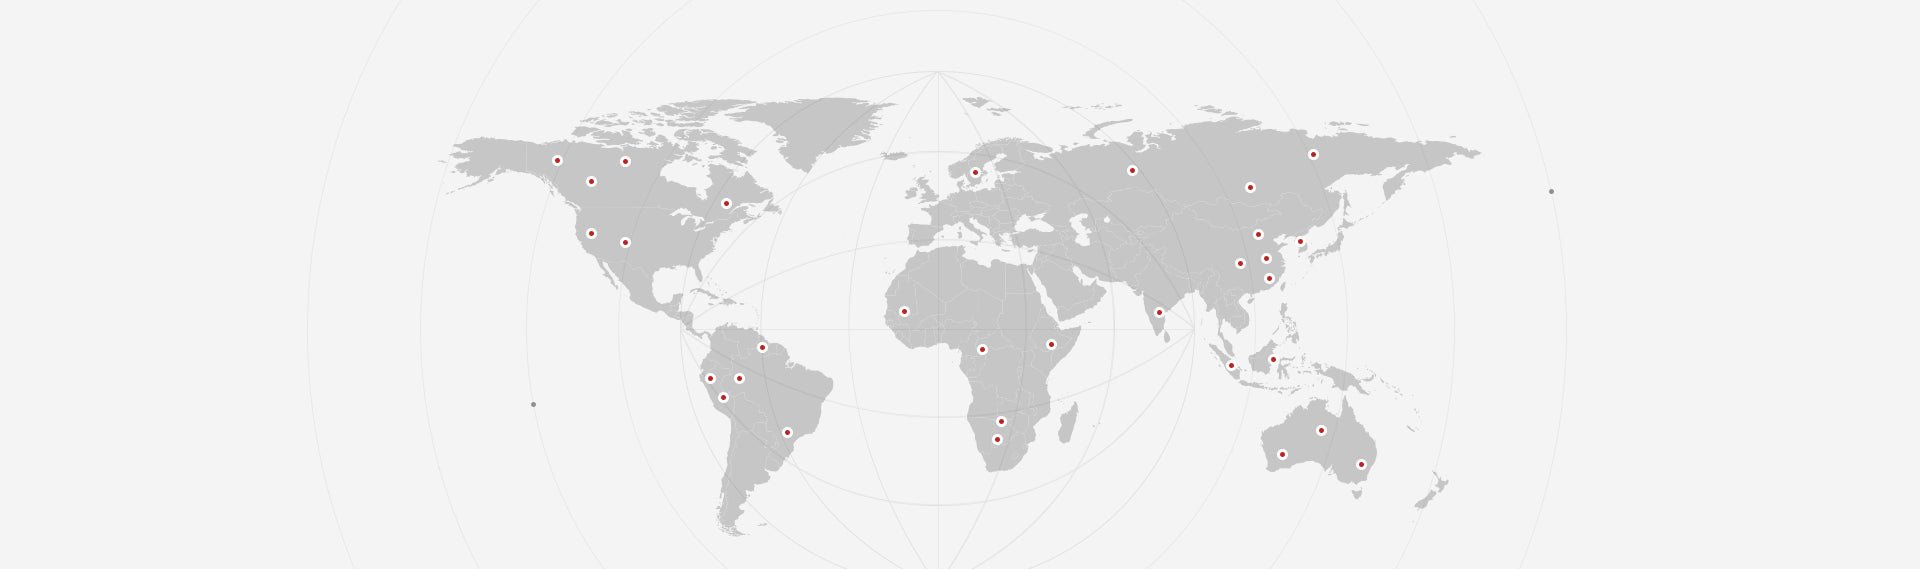 Our products are sold in 53 countries globally